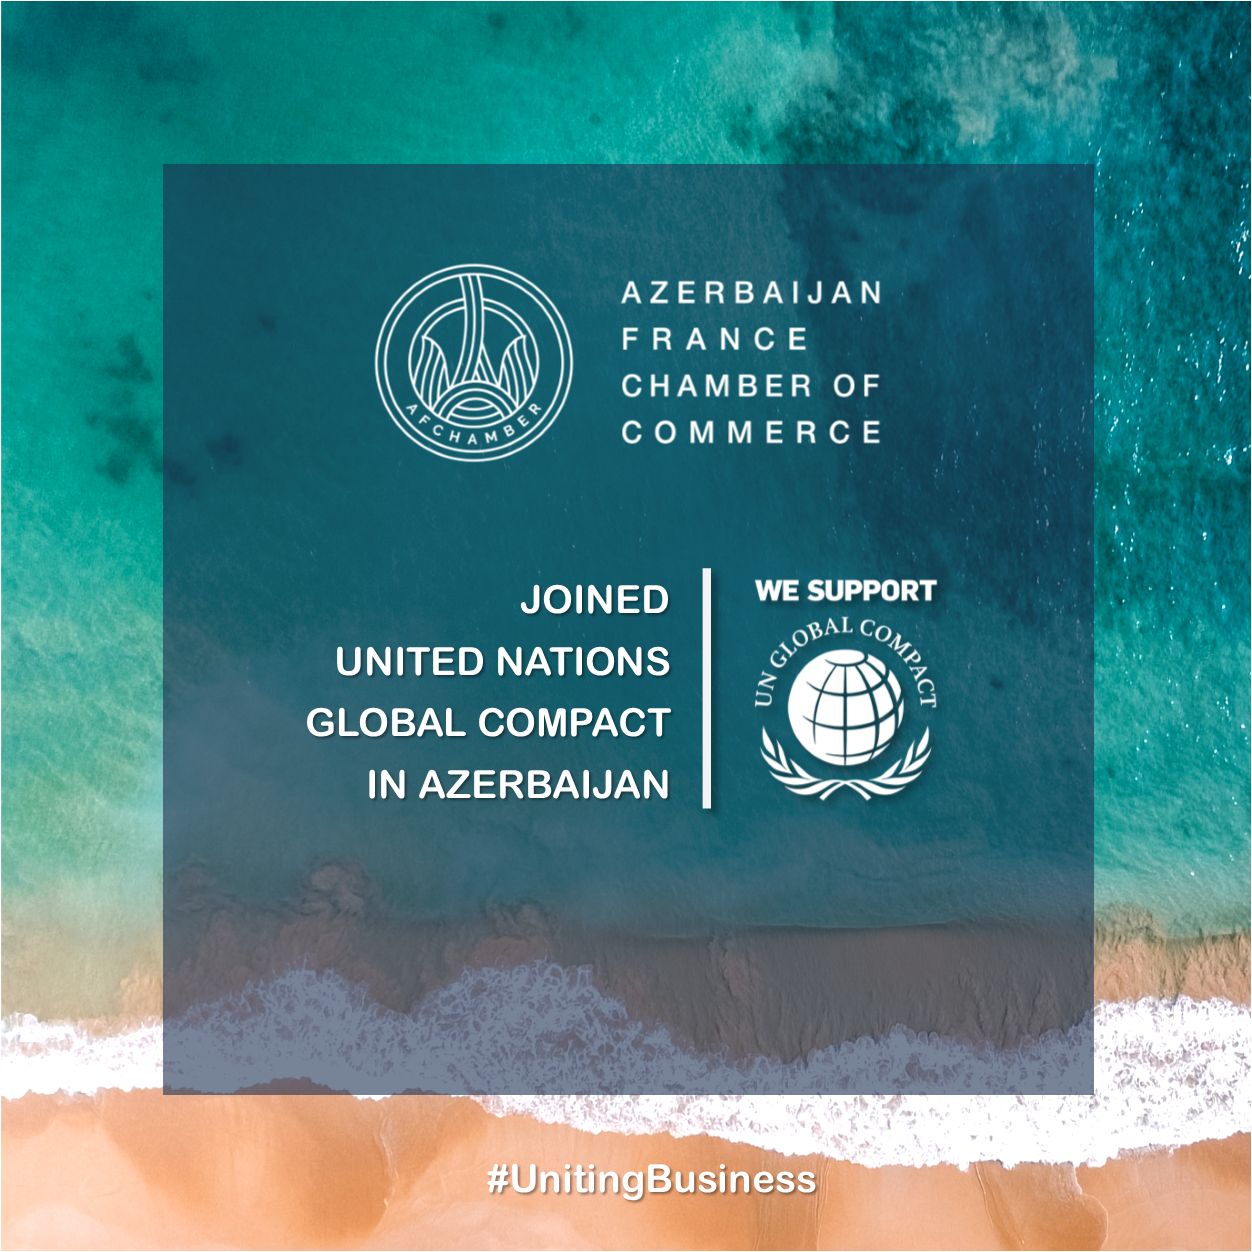 AFchamber became a member of the UN Global Compact In Azerbaijan.